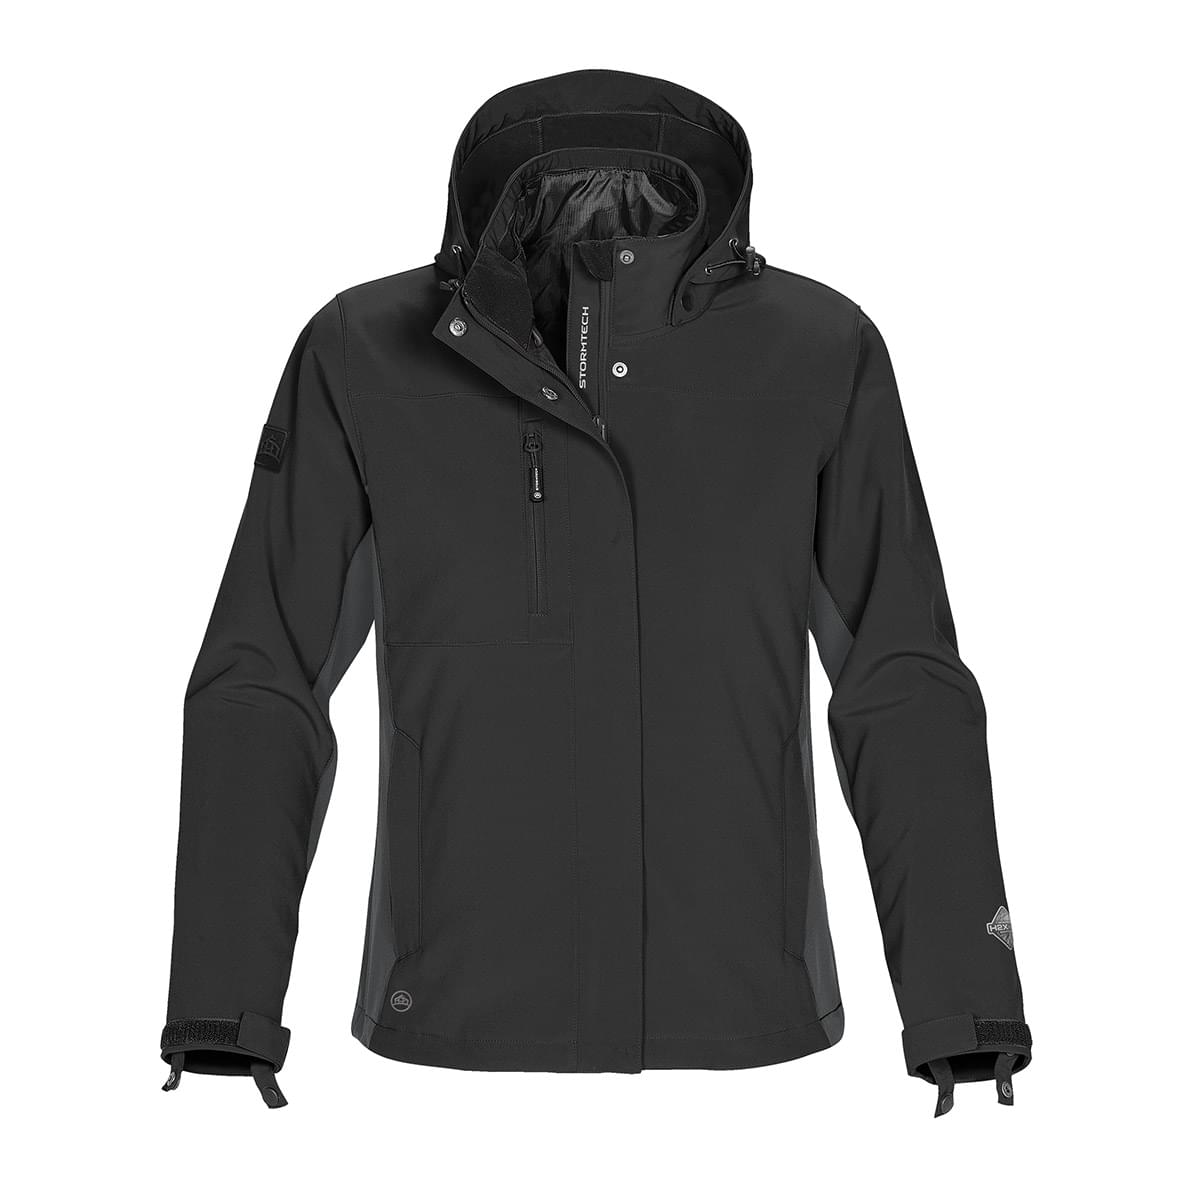 Women's Atmosphere System Jacket - Stormtech Canada Retail